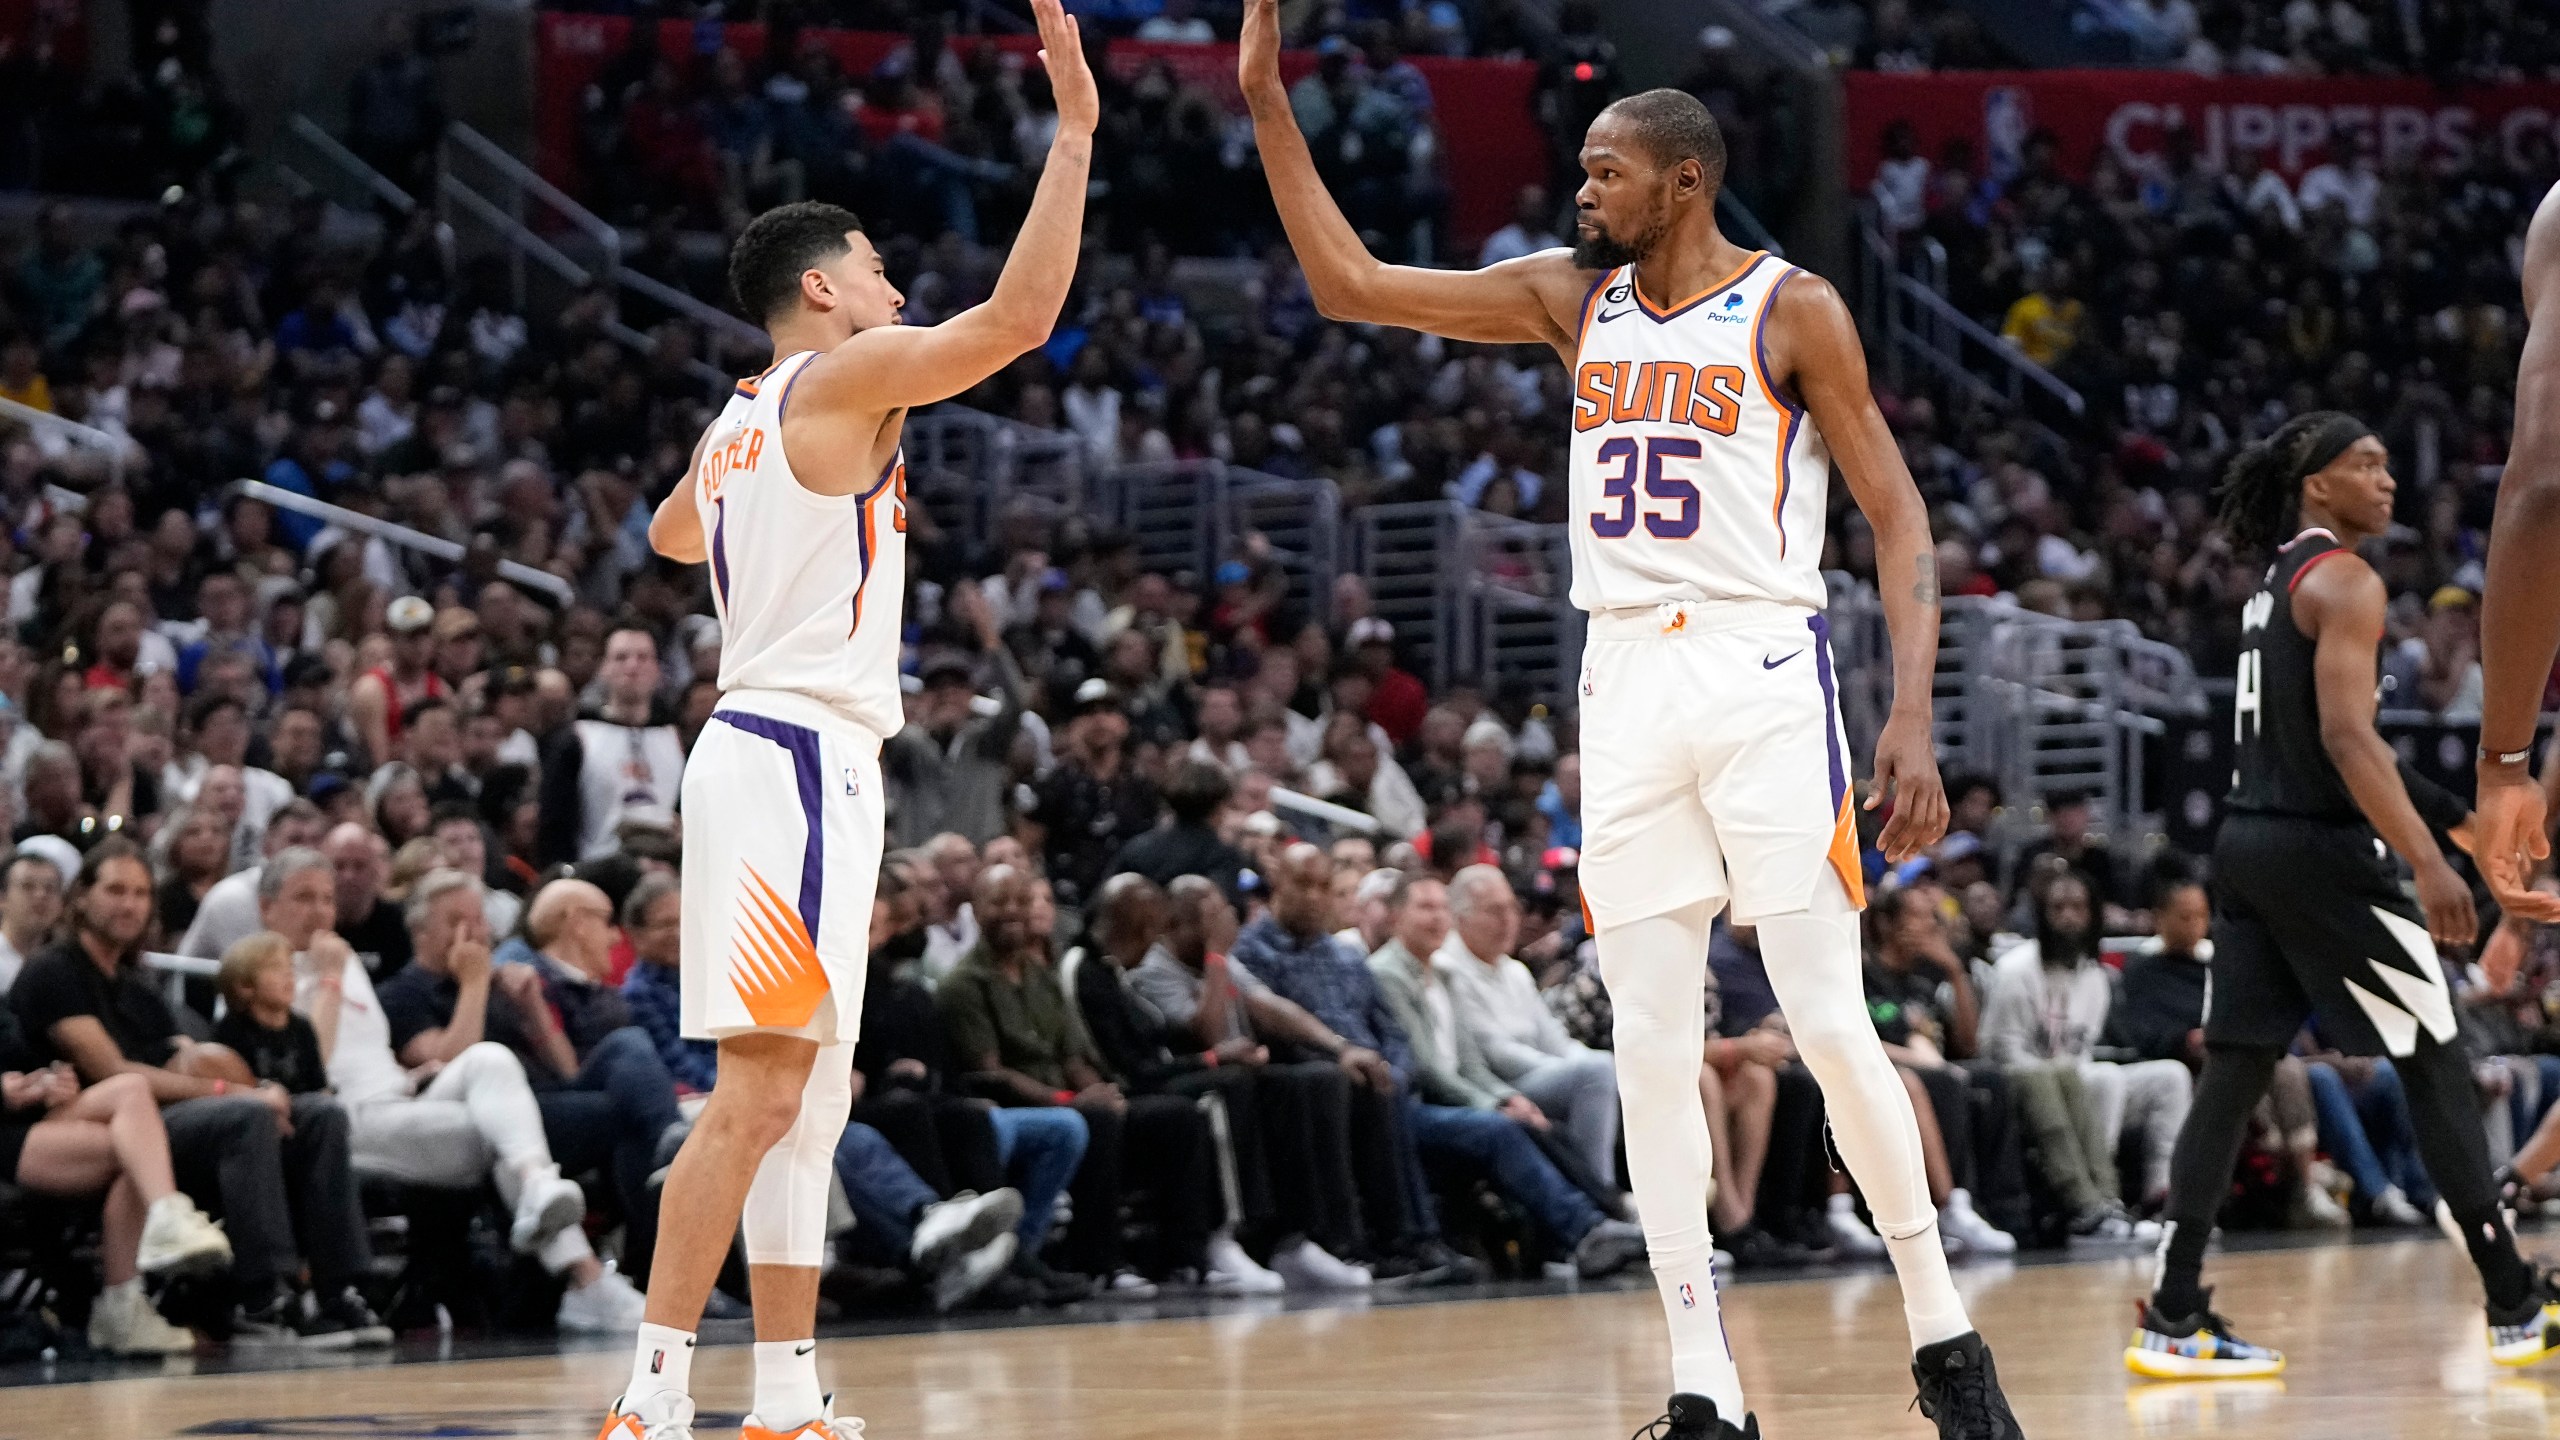 Phoenix Suns guard Devin Booker, left, and forward Kevin Durant congratulate each other during the second half in Game 4 of a first-round NBA basketball playoff series against the Los Angeles Clippers Saturday, April 22, 2023, in Los Angeles. (AP Photo/Mark J. Terrill)